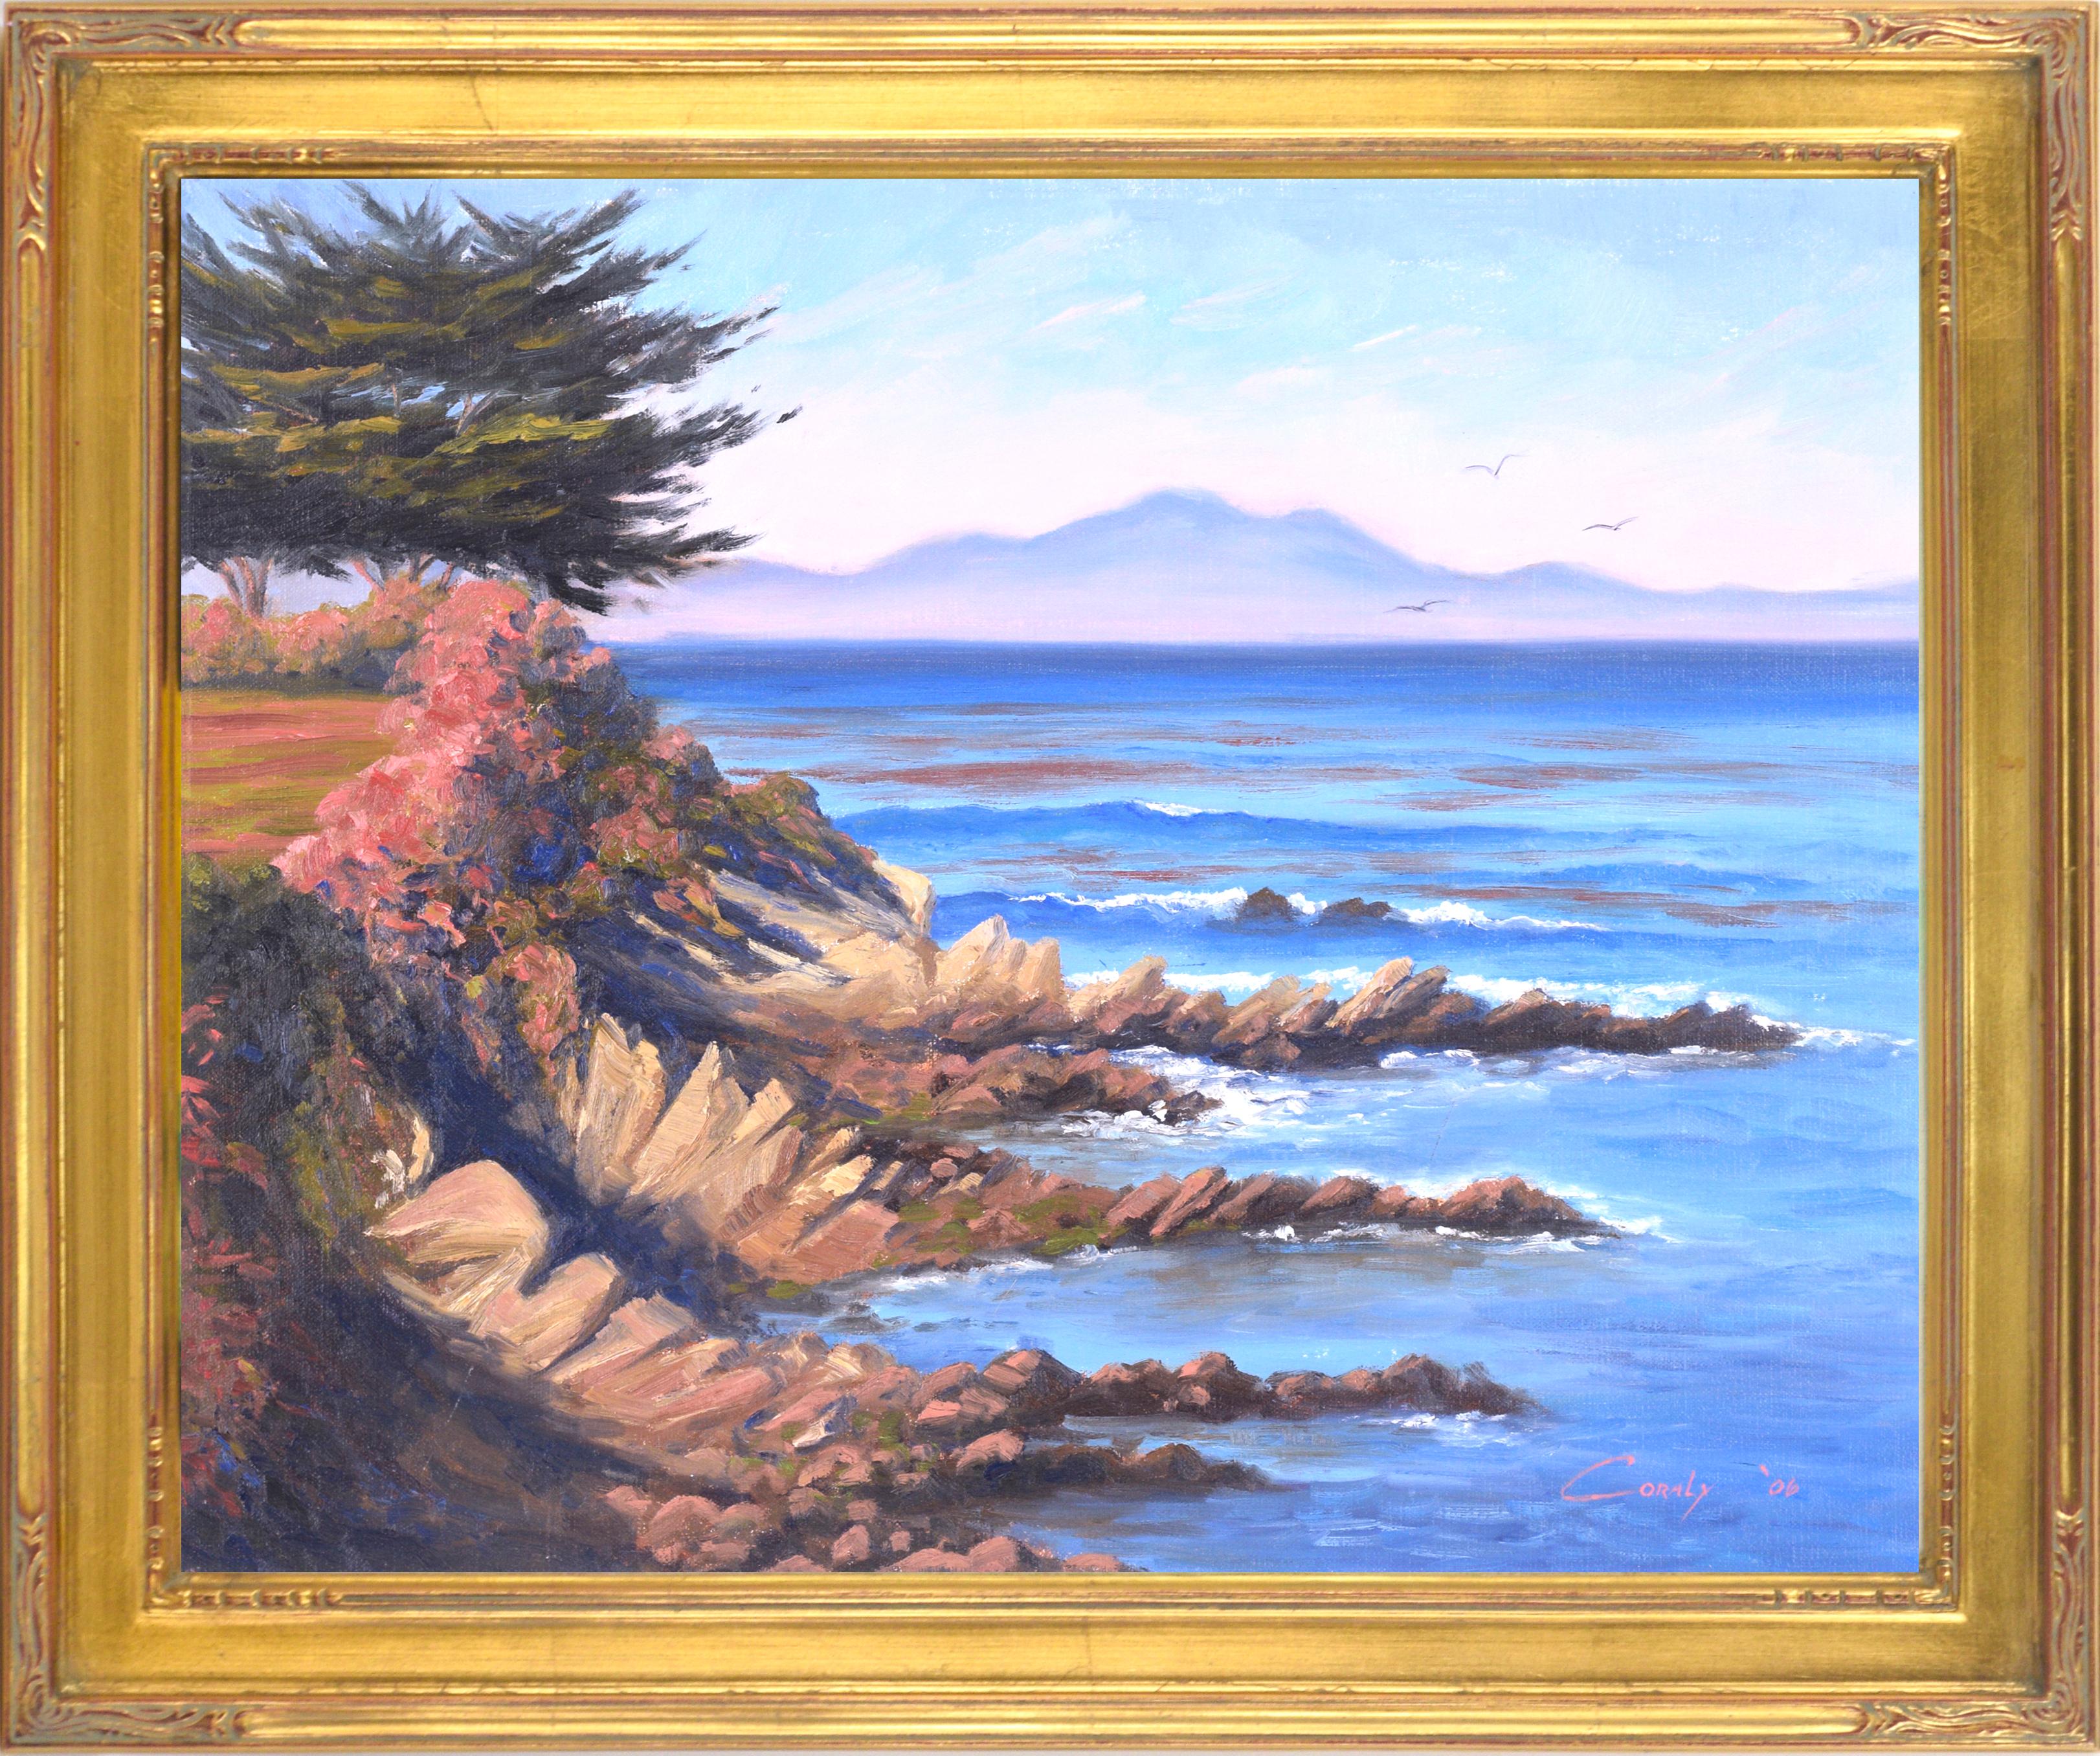 Landscape Painting Coraly Hanson - "Pacific Grove Glory" - Paysage marin rocheux